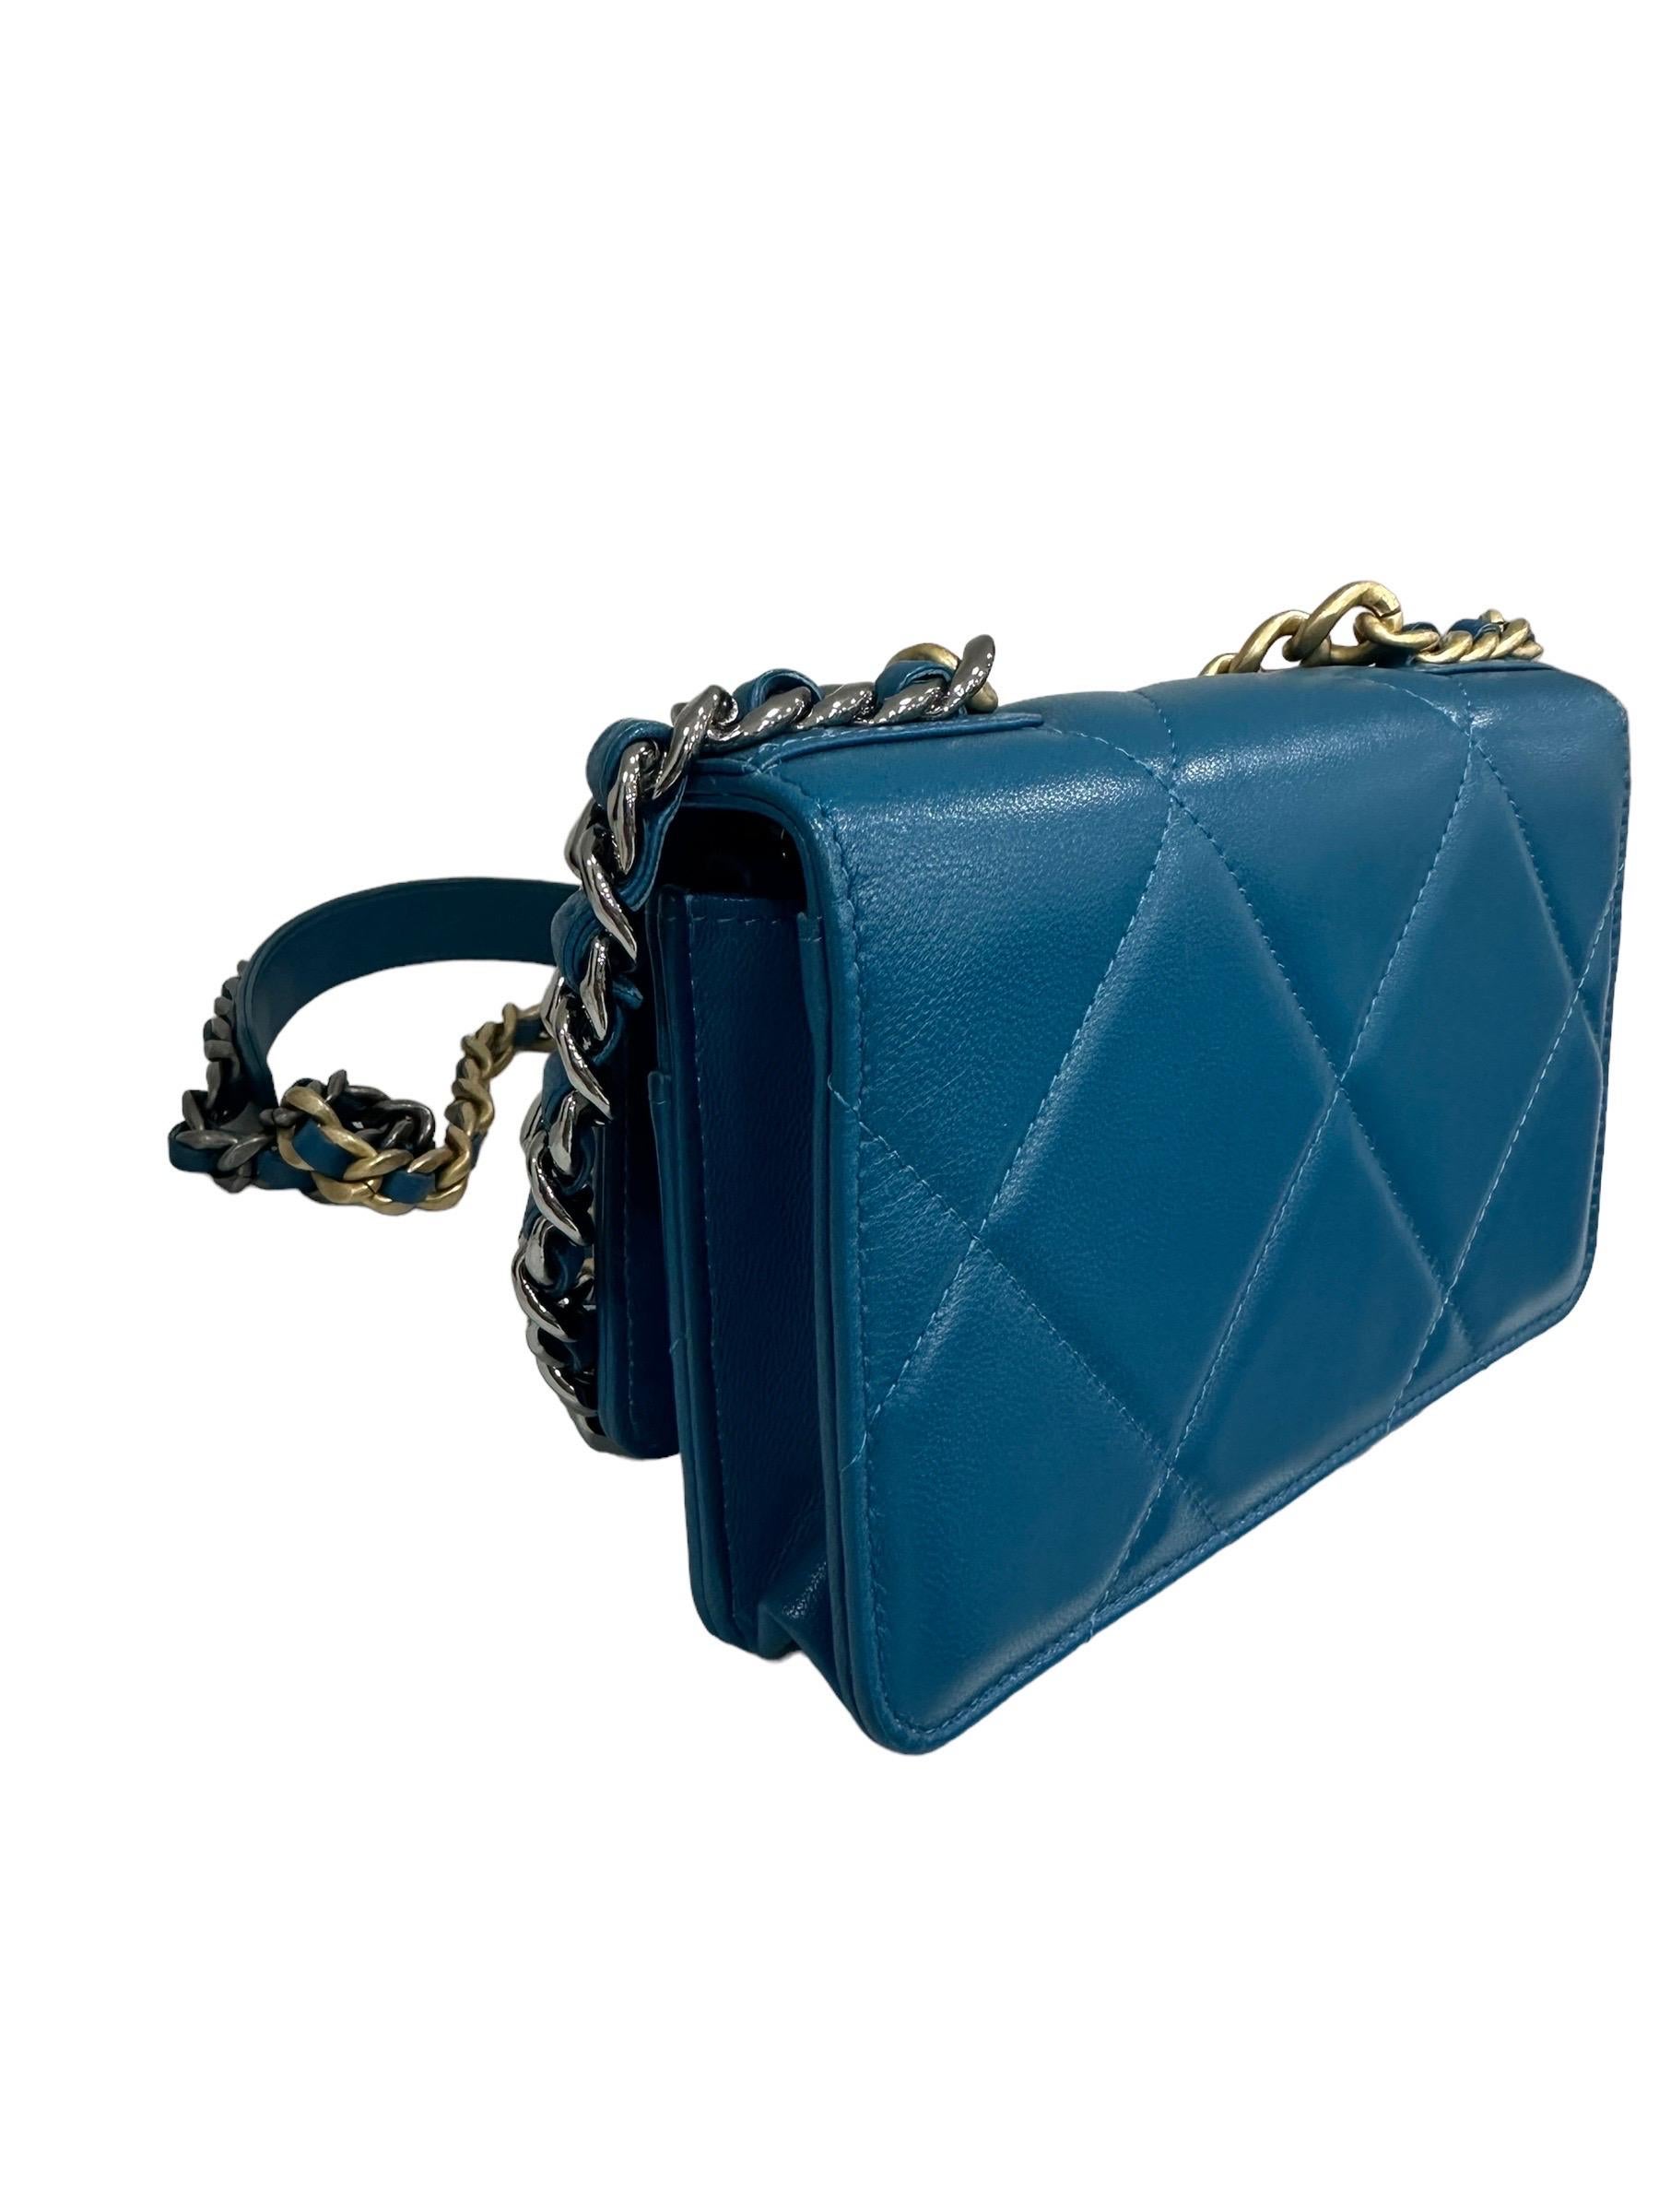 Women's 2021 Chanel 19 Wallet On Chain Blue Leather